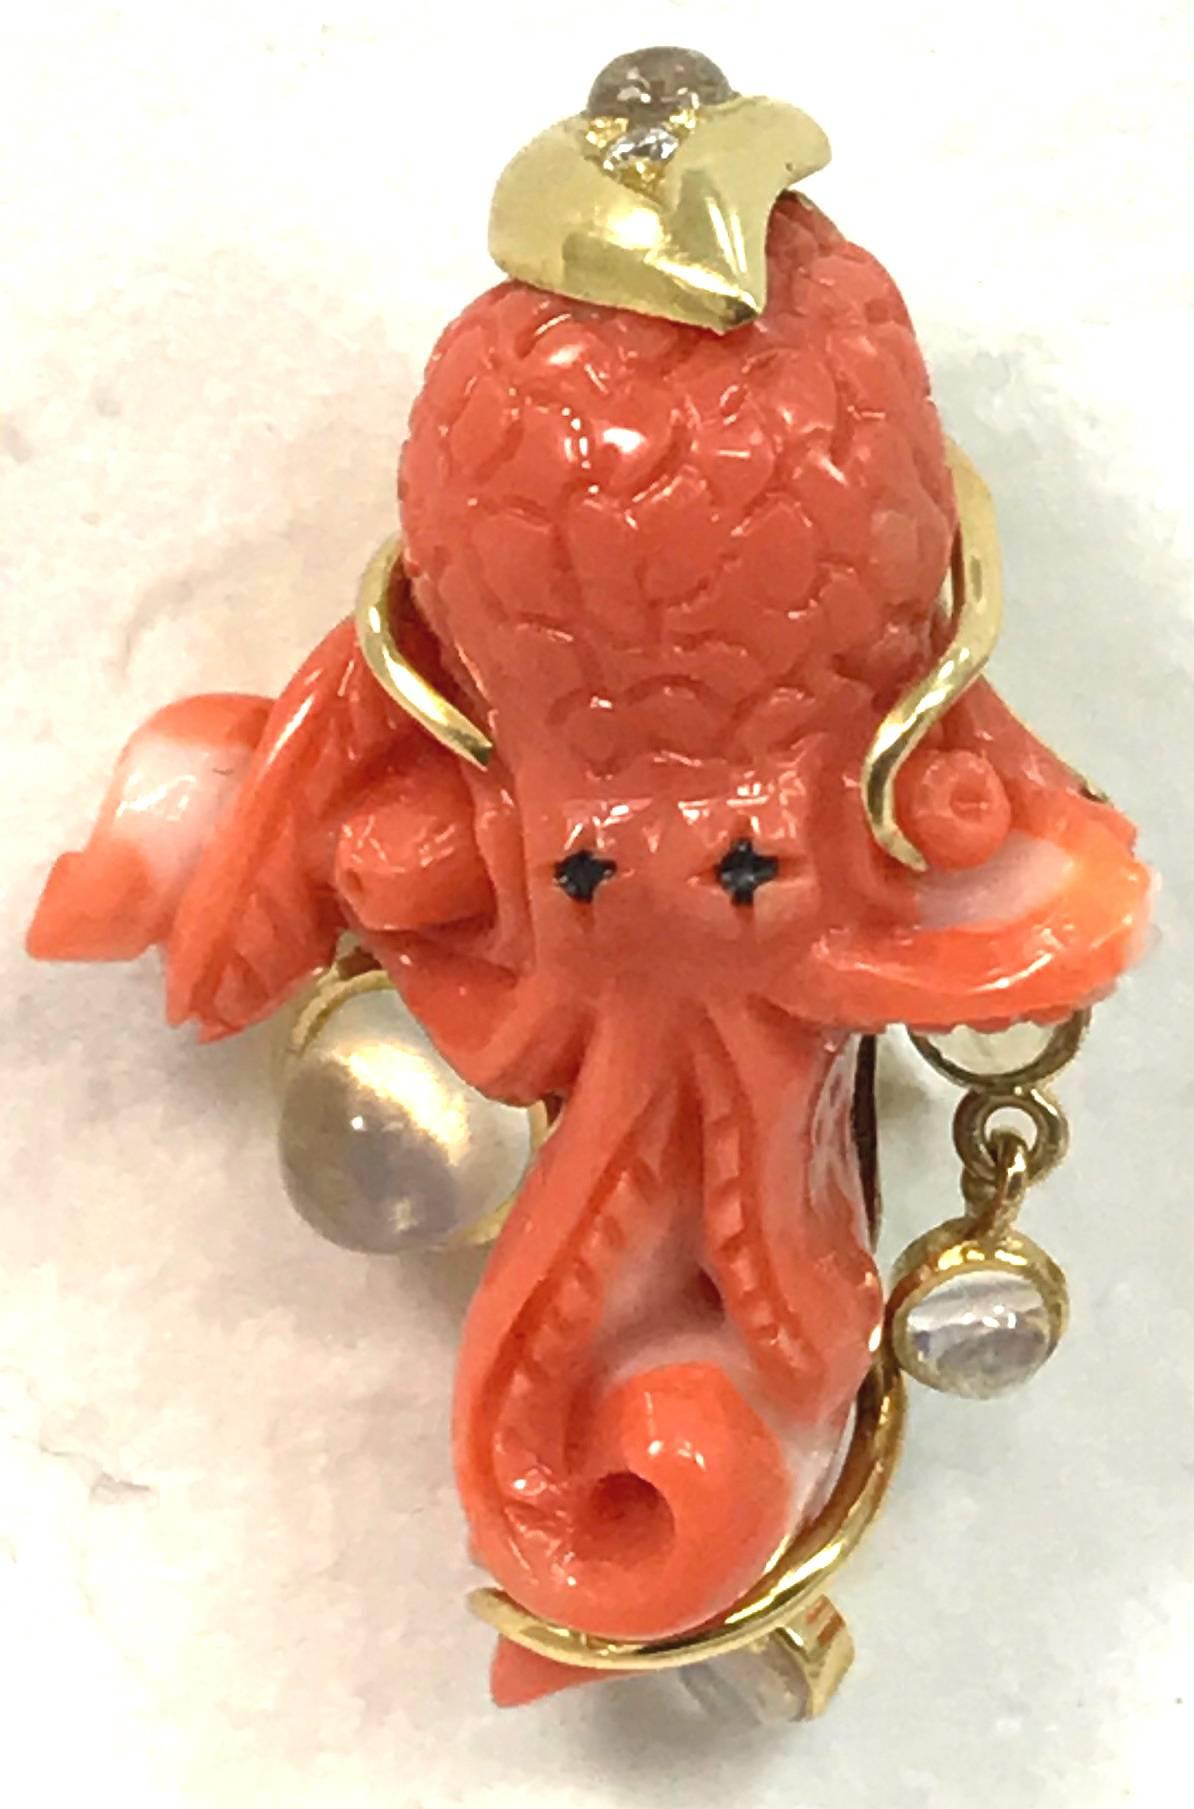 This is a one of a kind pair of spectacular carved coral octopus clip pierced earrings set in 18 karat gold with gold encased moonstone dangles and small diamonds decorating the top of each, created by New York jewelry designer Marilyn Cooperman,